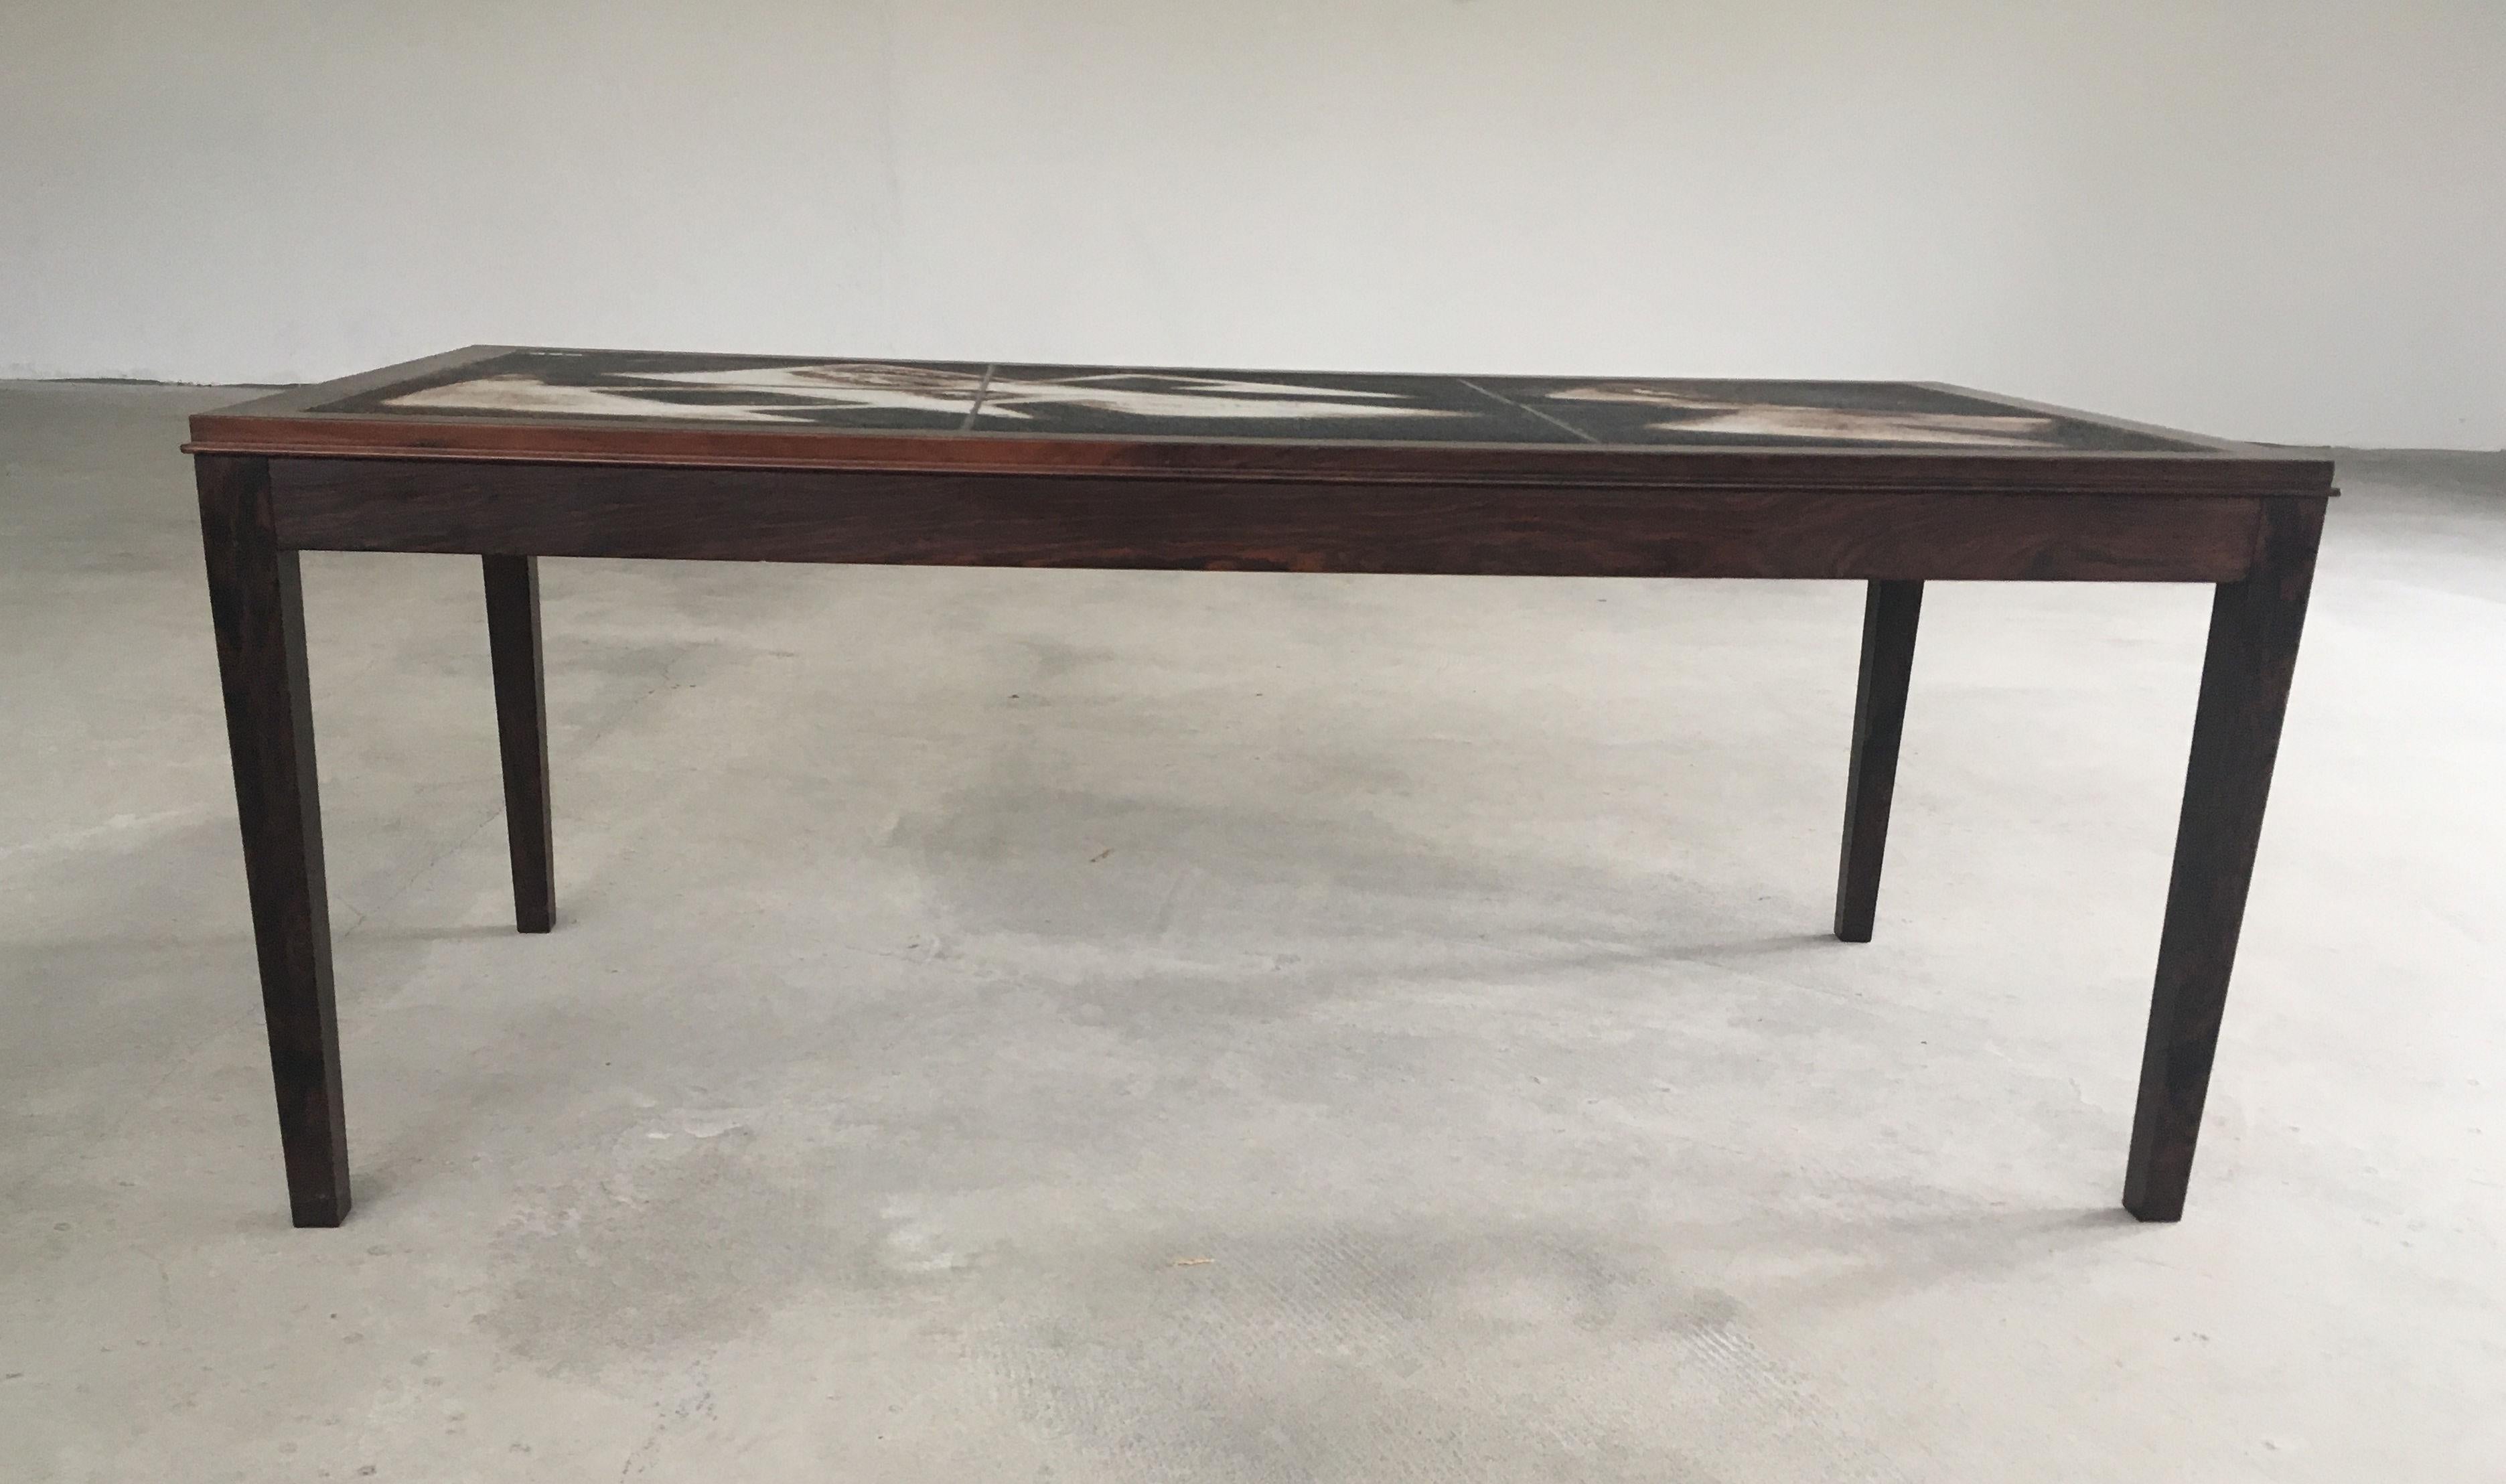 Danish 1960s Ole Bjorn Krüger Fully Restored Tile Topped Coffee Table in Rosewood For Sale